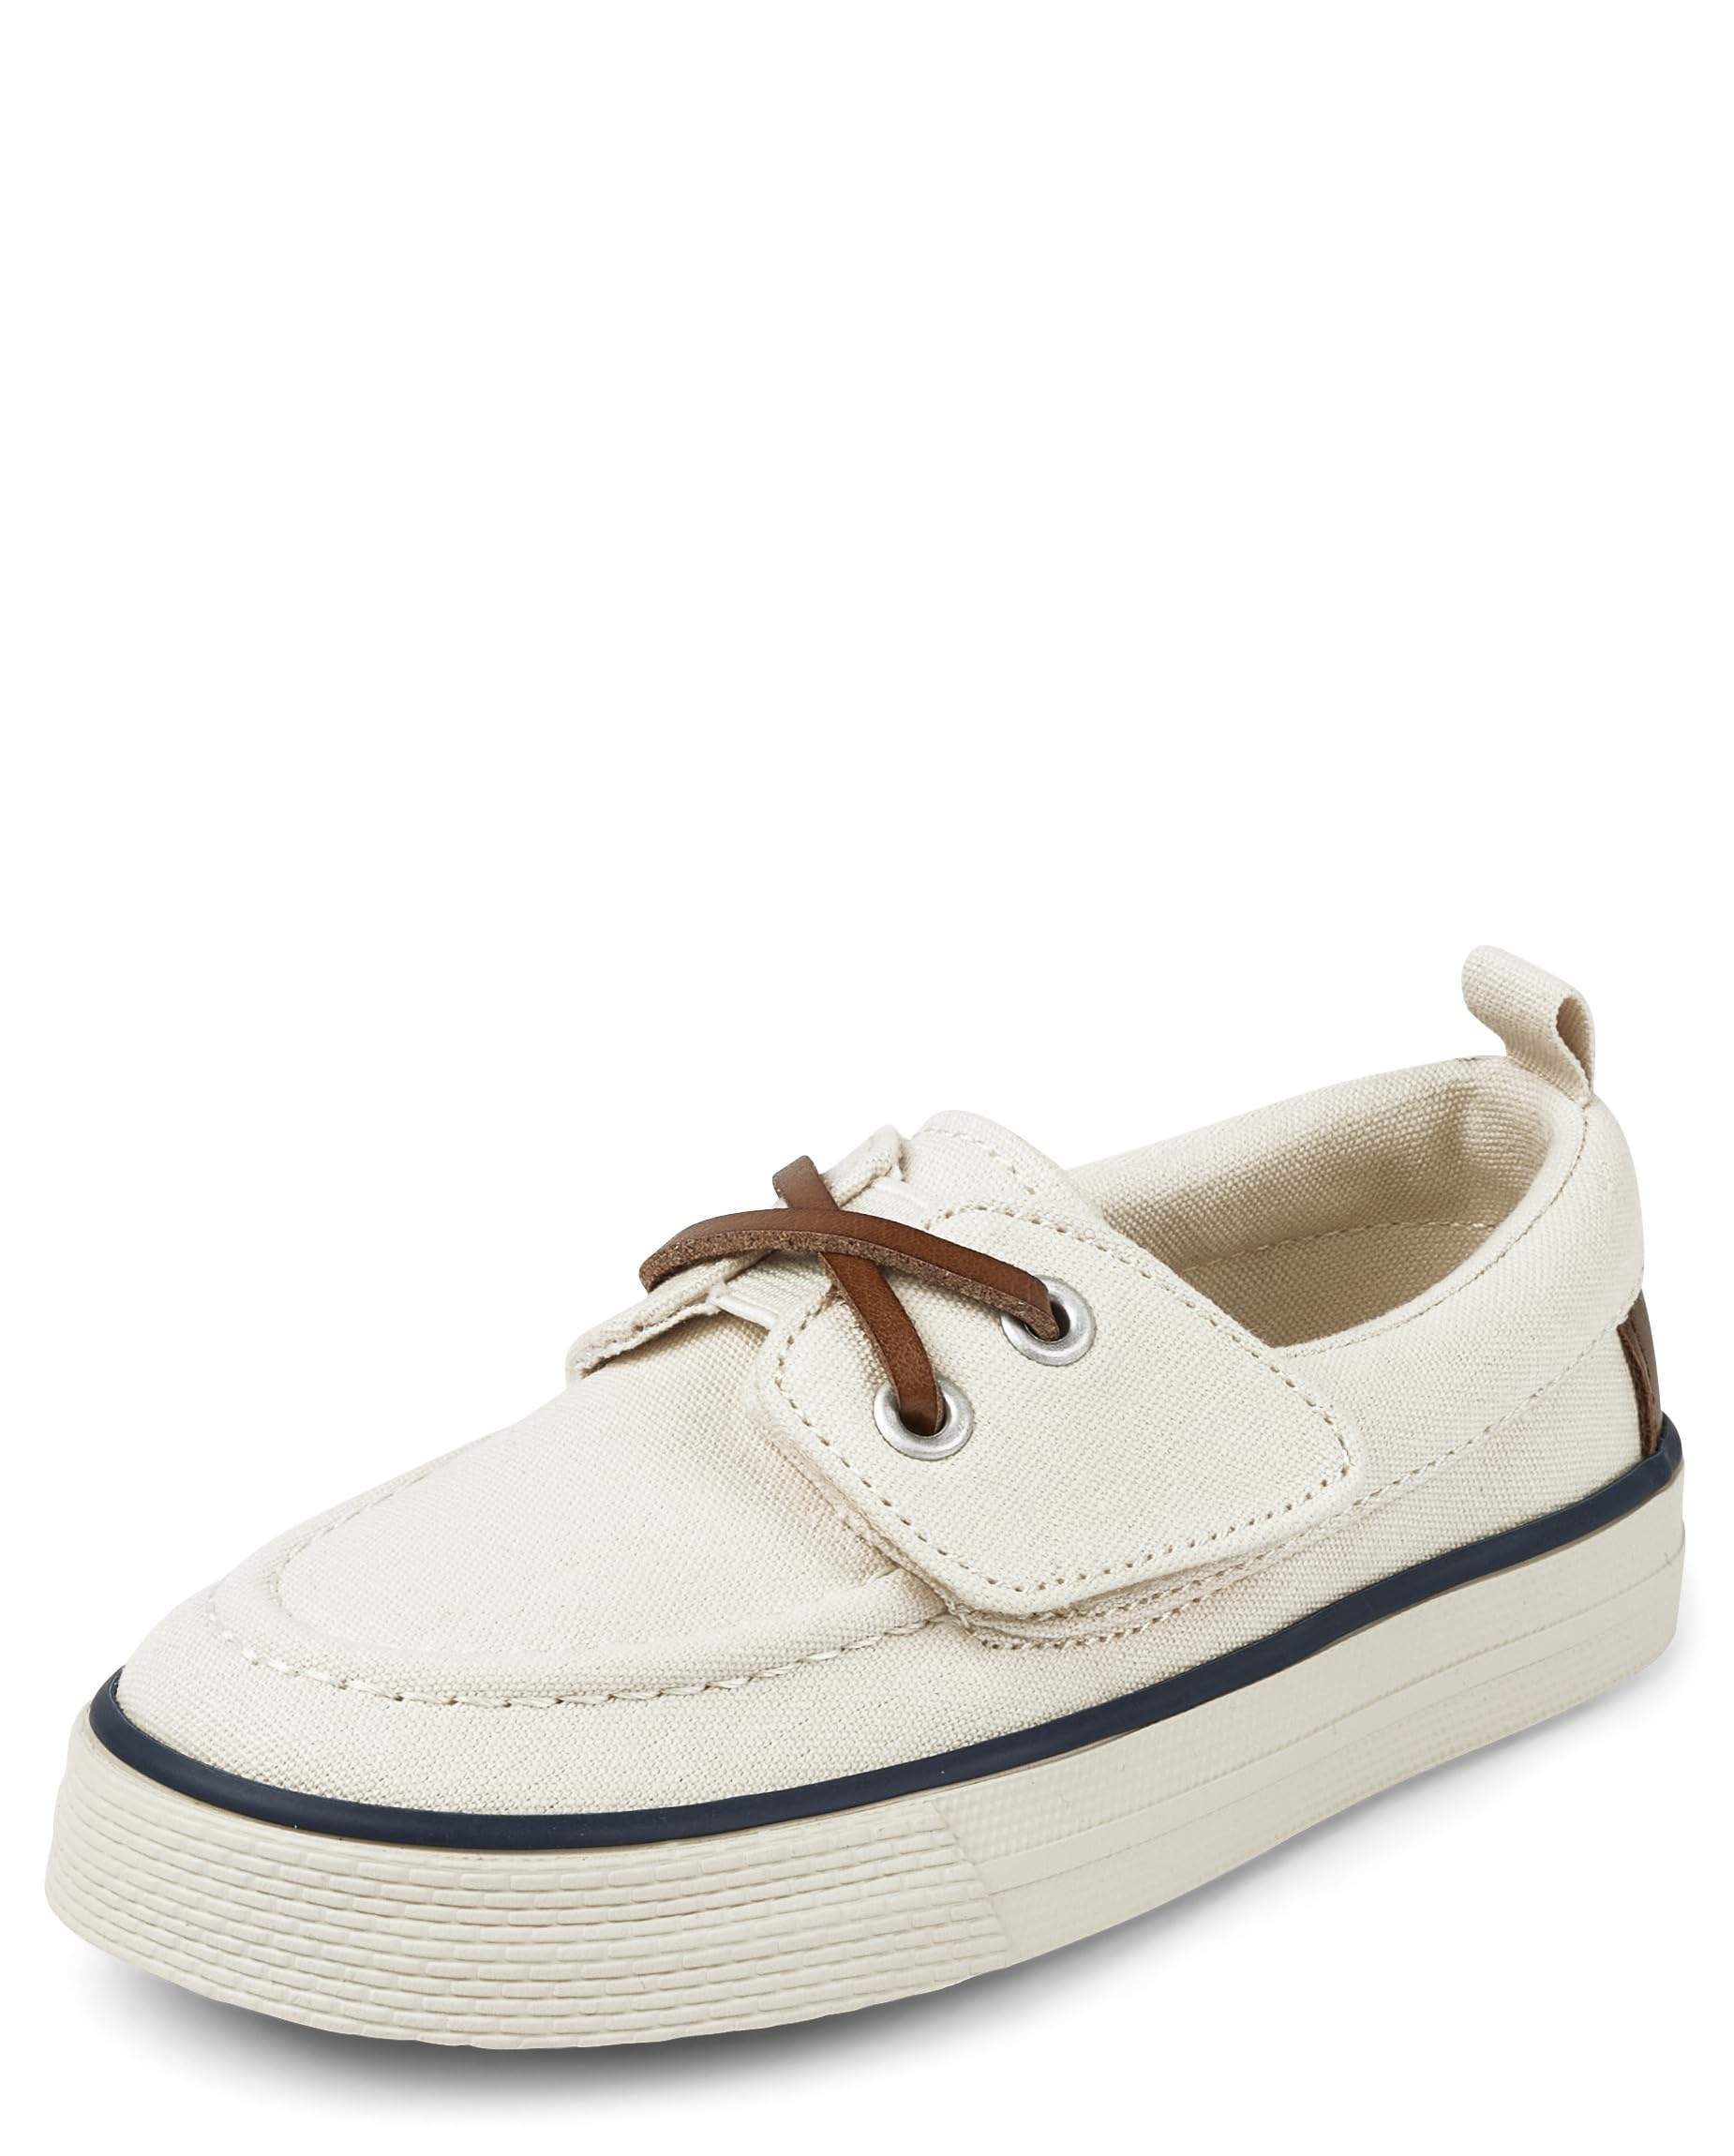 Gymboree Boy's and Toddler Boat Shoe